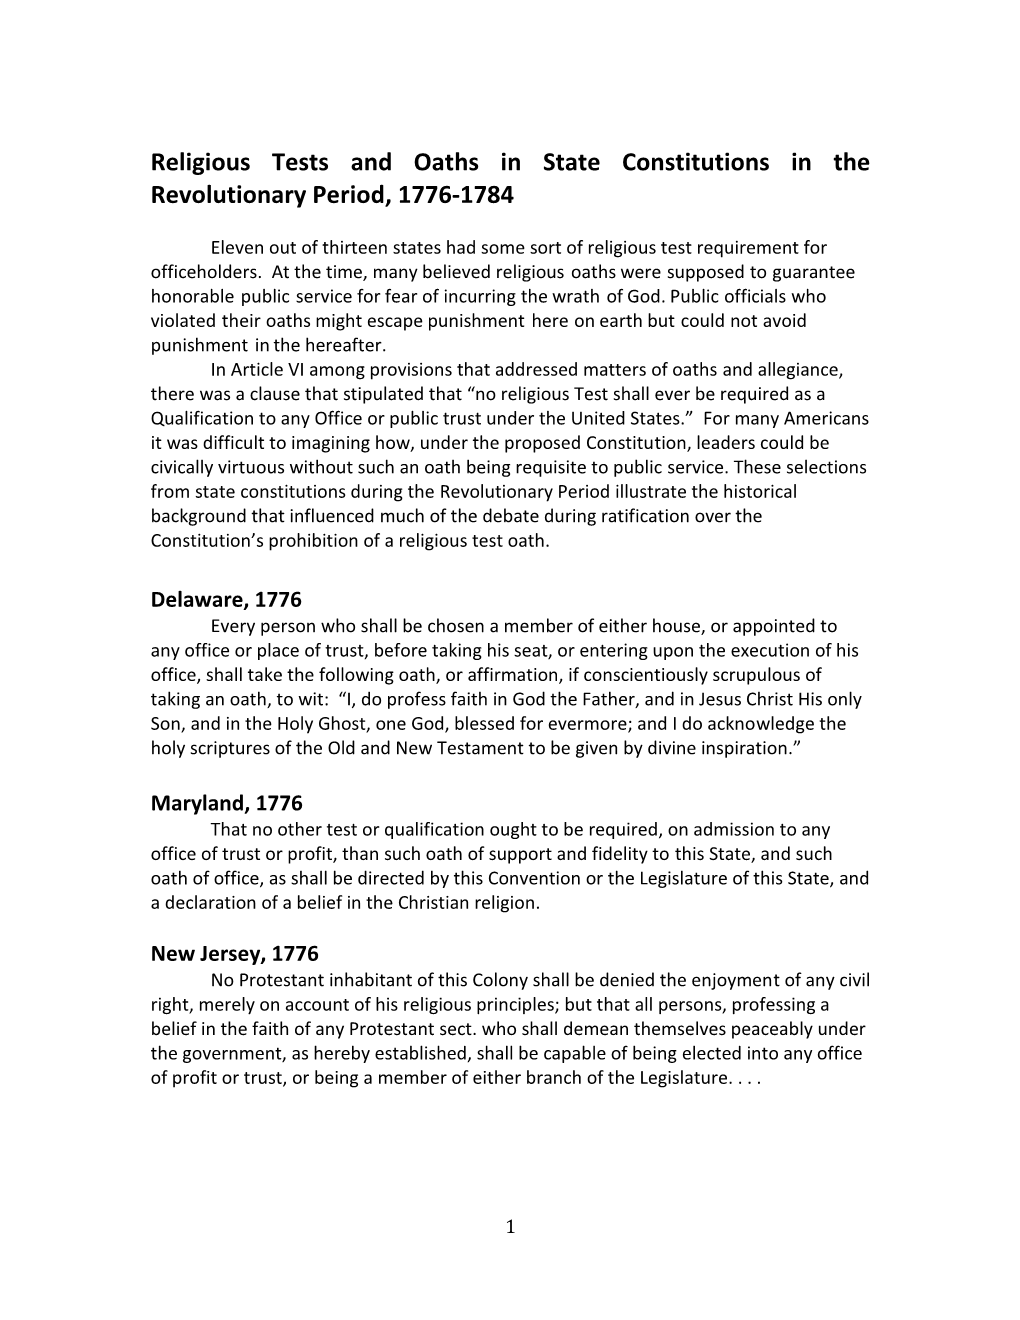 Religious Tests and Oaths in State Constitutions in the Revolutionary Period, 1776-1784